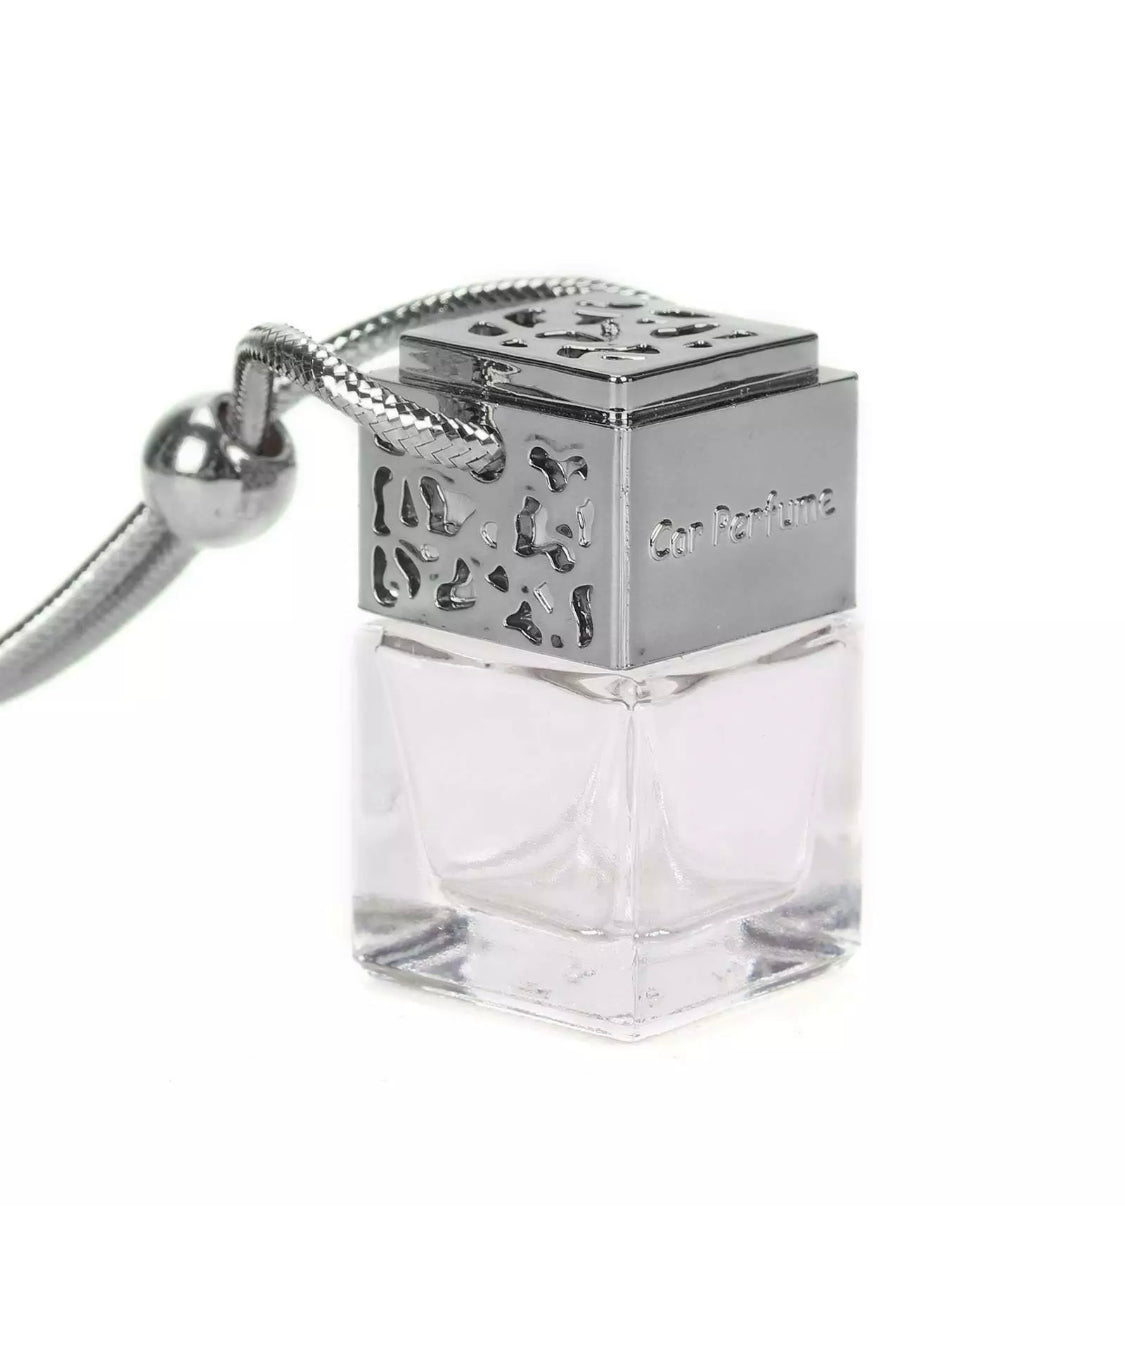 ROYAL OUD SILVER DESIGNER CAR DIFFUSER 8ml BRAND NEW PRODUCT LIMITED EDITION